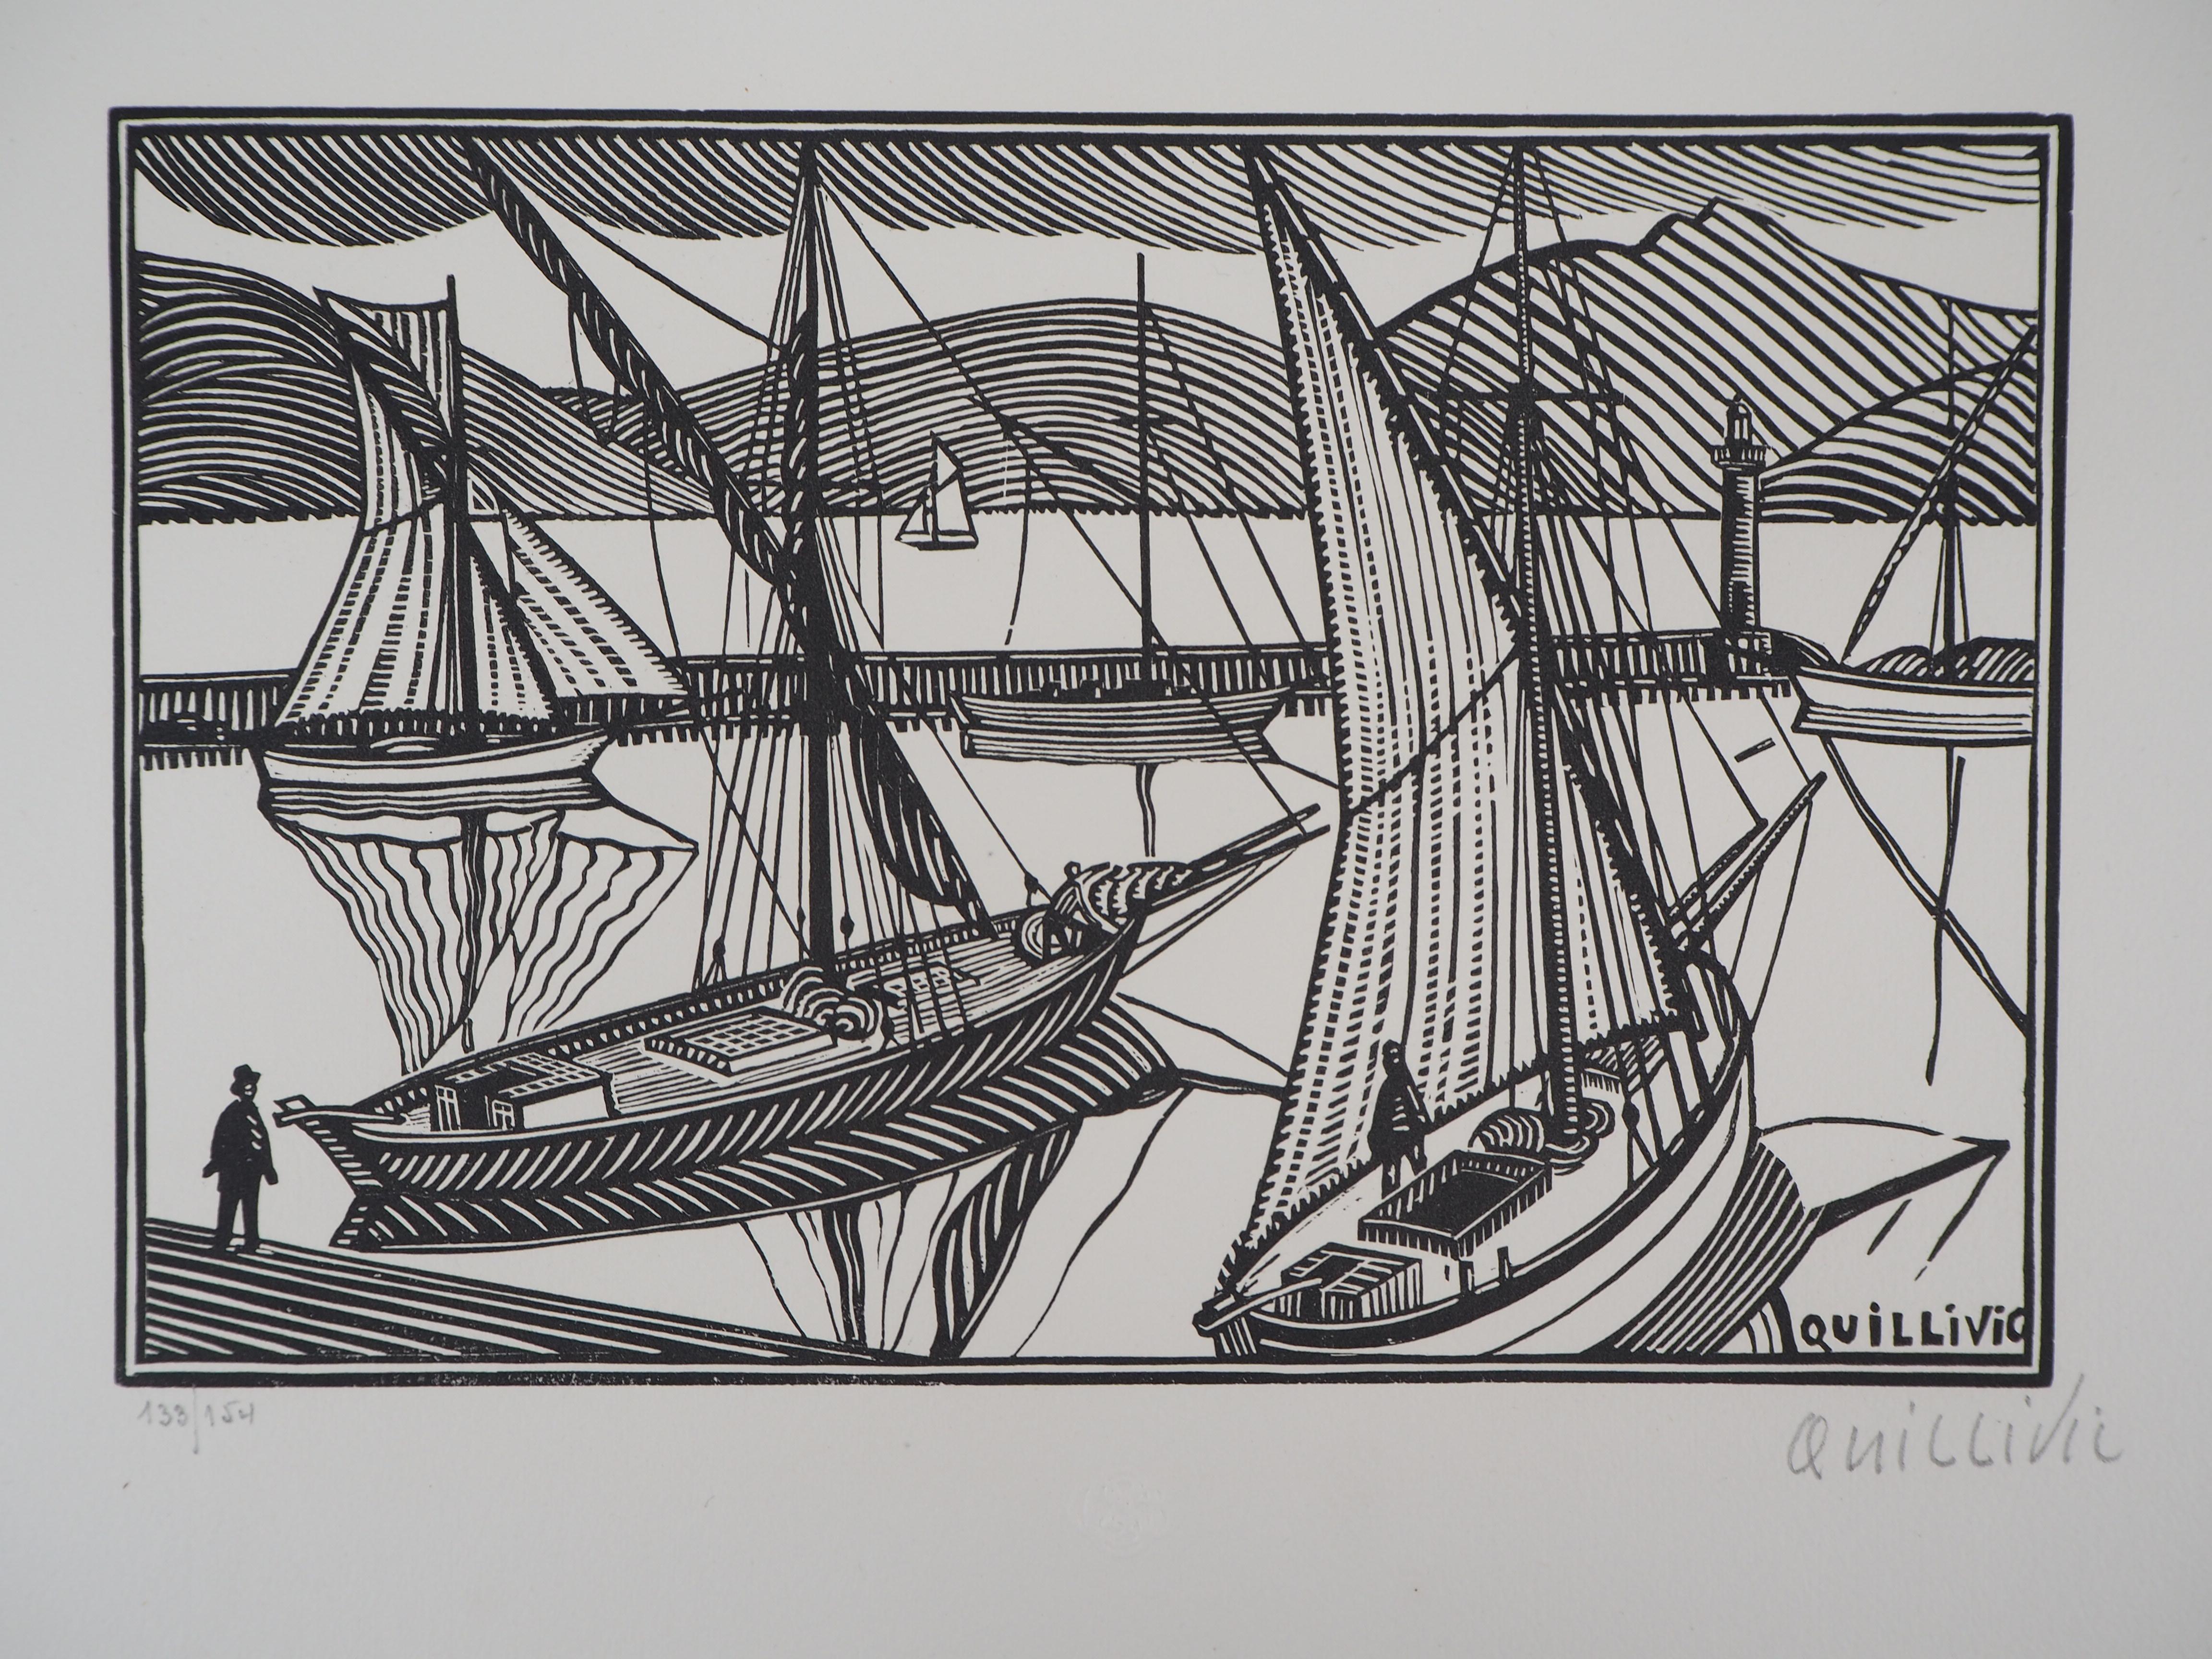 René Quillivic Landscape Print - Brittany : Boats at the Harbour - Original wooodcut, Handsigned